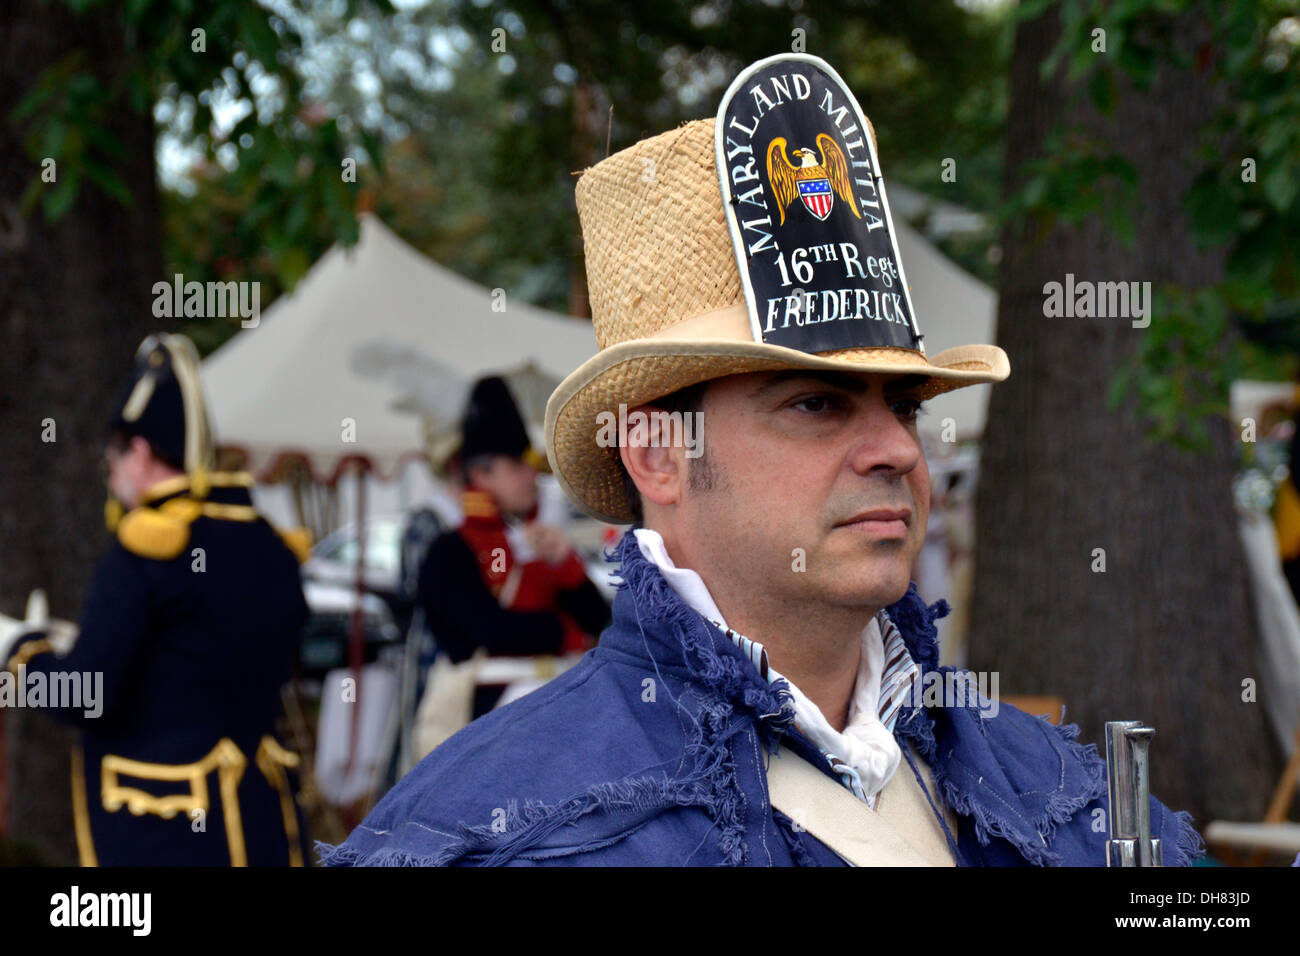 Man dressed as a member of the Md Militia 16th regiment in Frederick  during a reenactment of the war of 1812 Stock Photo